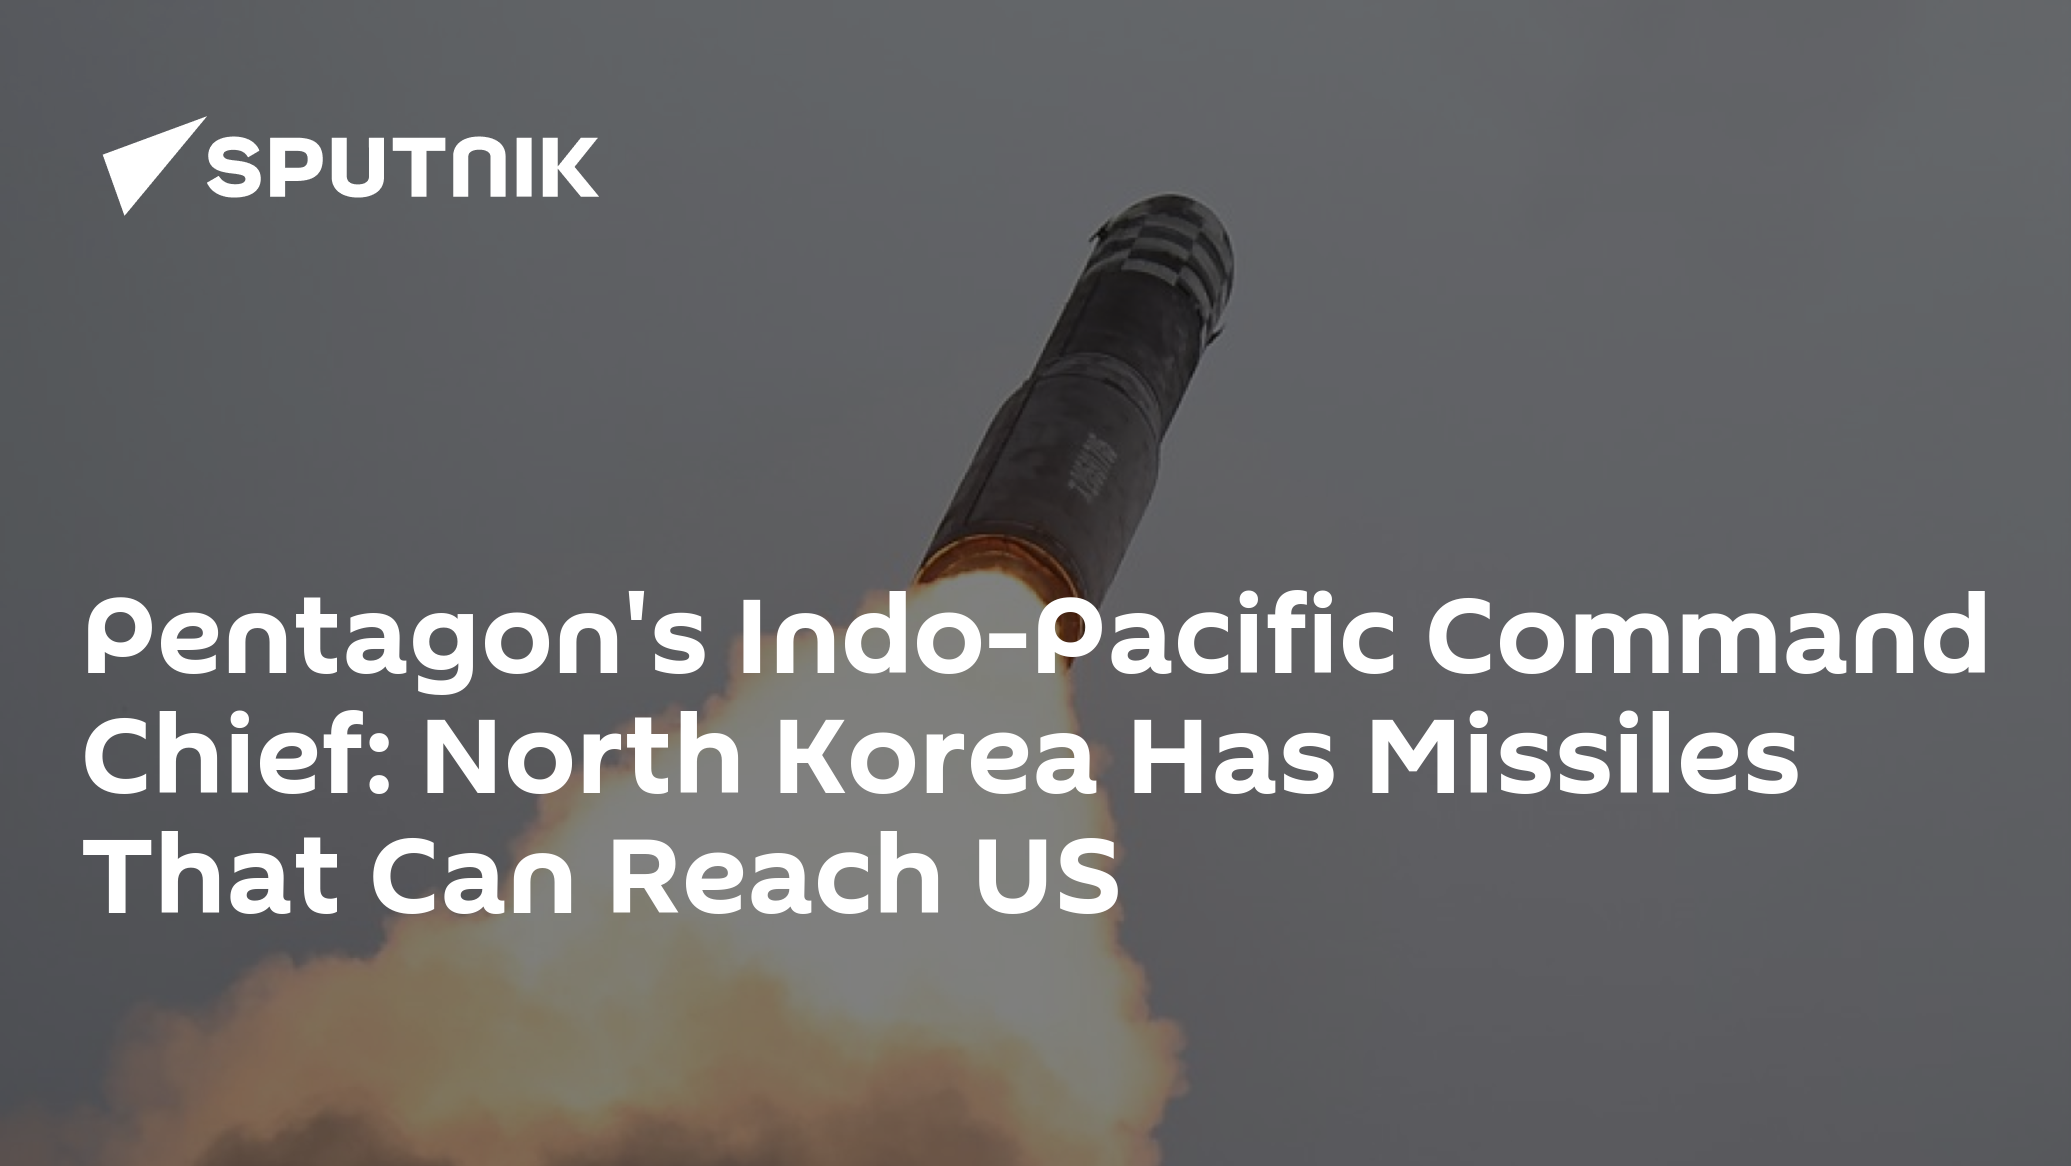 Pentagon's Indo-Pacific Command Chief: North Korea Has Missiles That Can Reach US